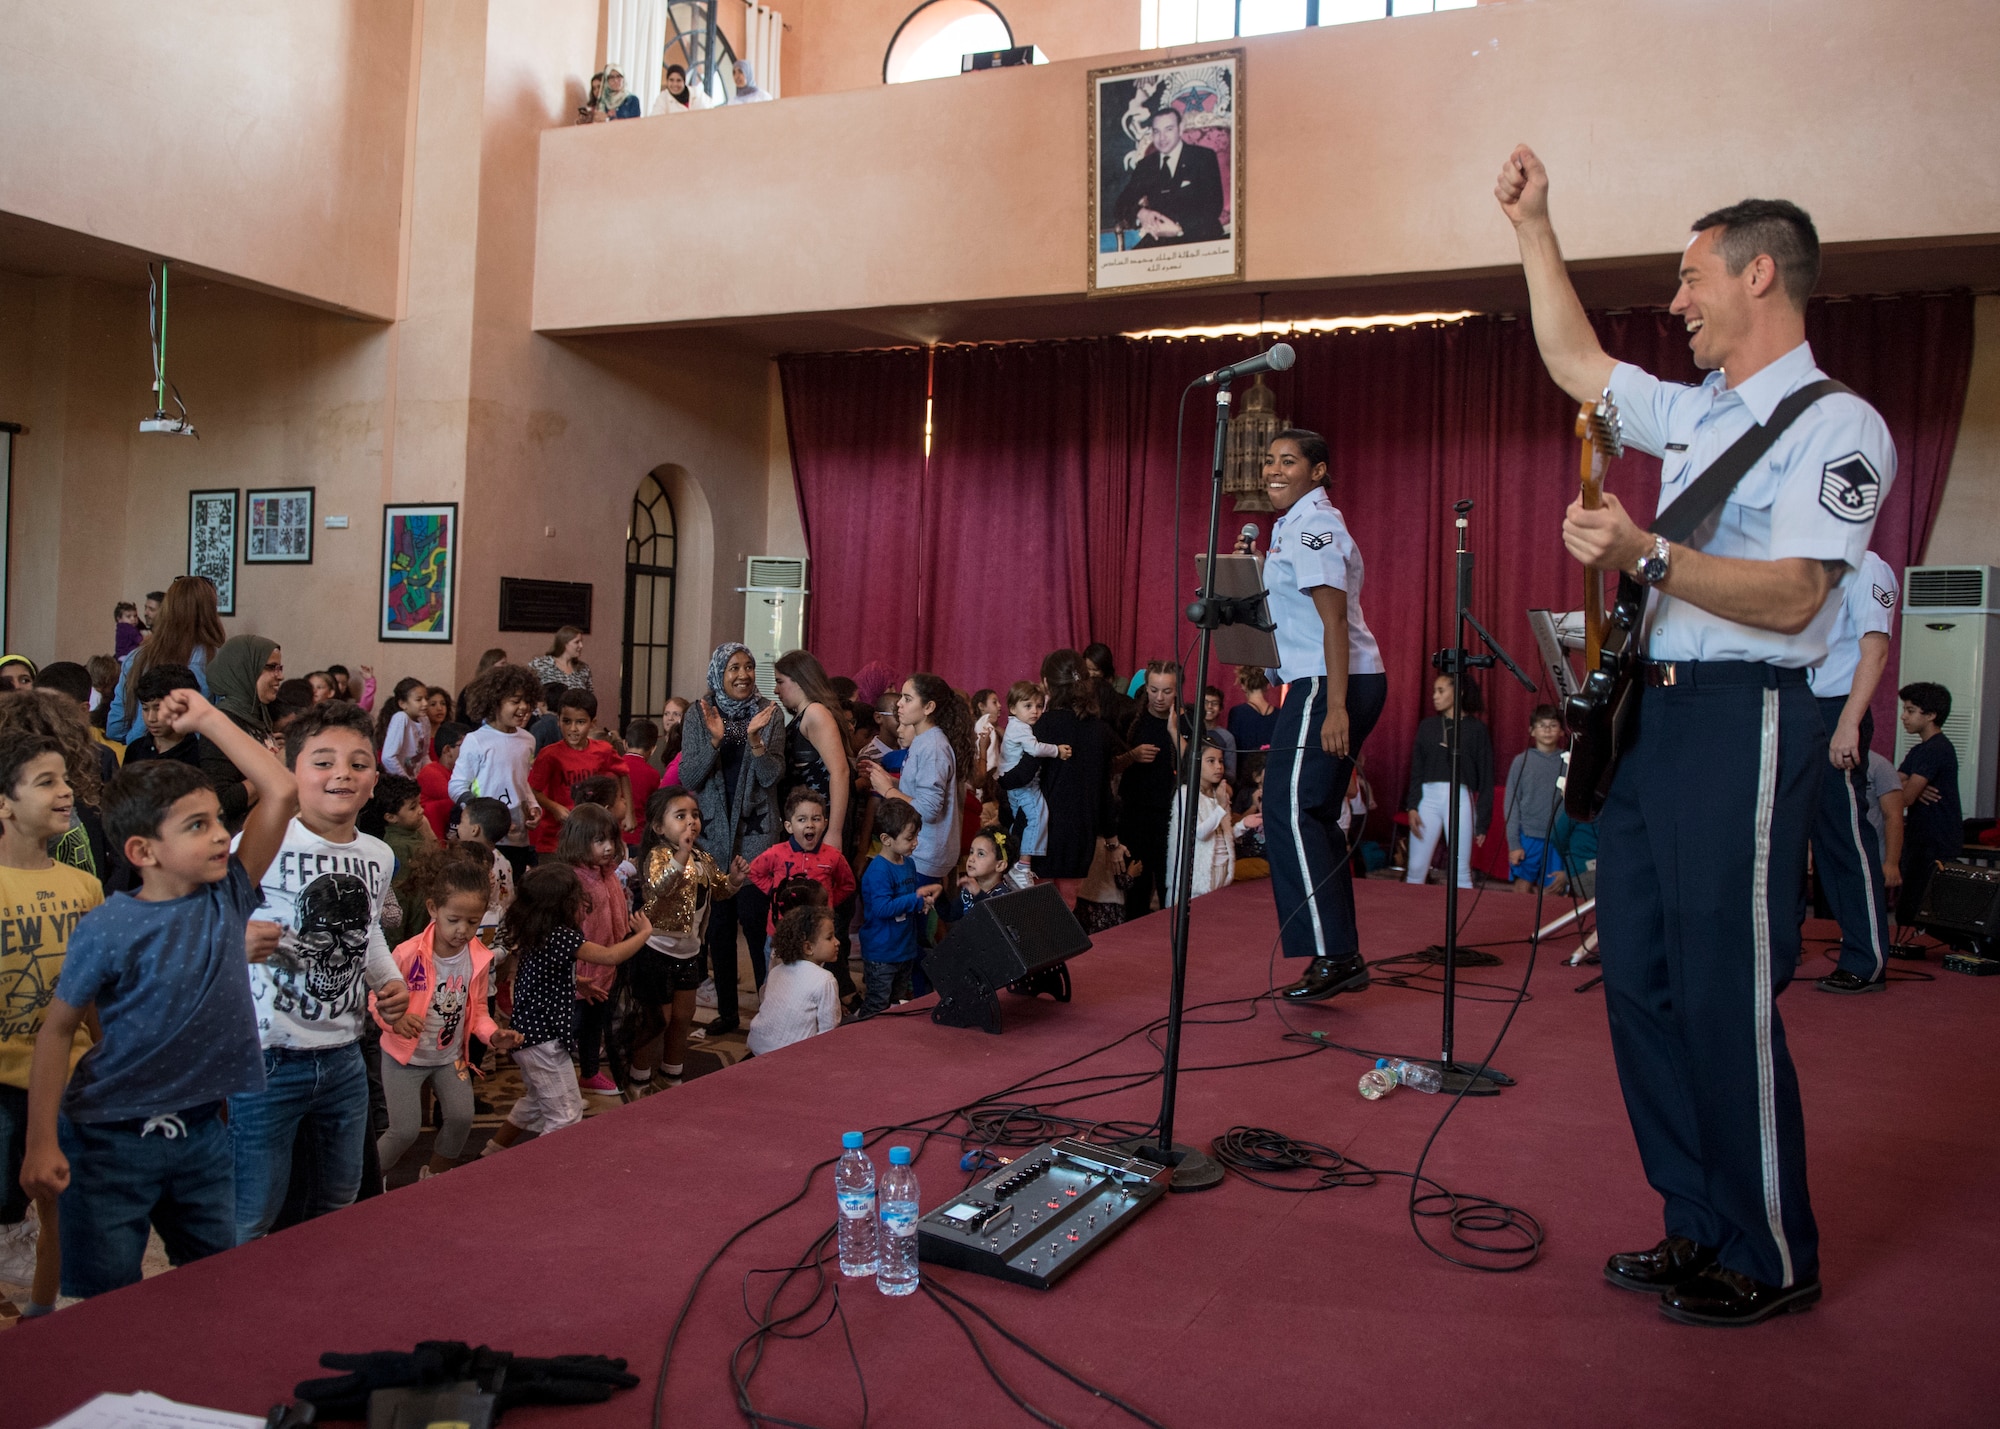 MARRAKECH, Morocco (Oct 23, 2018) Master Sergeant Johnny Kukan, USAFE-AFAFRICA Band Touch n’ Go NCOIC/guitarist, performs at The American School of Marrakesh. The band, in Morocco to support the African Air Chiefs Symposium and the Marrakech Air Show, also had the opportunity to perform for nearly 400 students. The aviation events and band performances highlighted the strong cooperation and partnership between the U.S. and Morocco and demonstrates U.S. commitment to safety and security across Africa.  (DoD photo by Mass Communication Specialist 2nd Class Cody Hendrix)